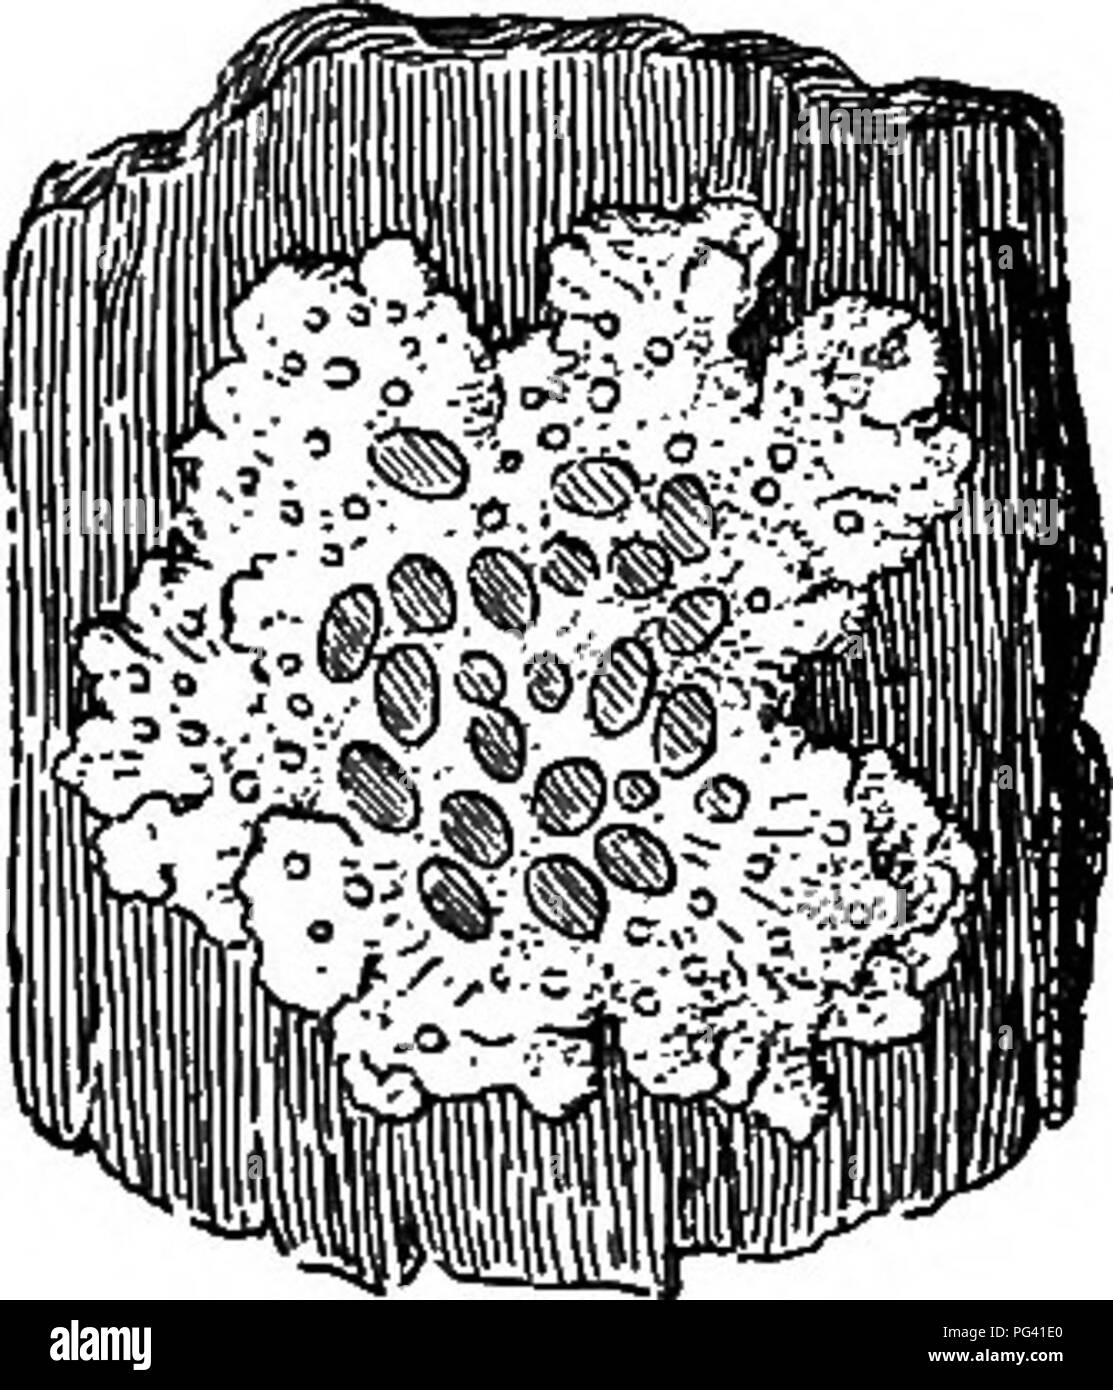 . Foundations of botany. Botany; Botany. TYPES OF CRYPTOGAMS; THALLOPHYTES 271 329. The Fruit. â Loot for small lance-shaped disks seated upon the thallus. Note the approximate sizes and color within and â without. These disks are called apothecia. Note the very minute black specks (spermogones) which are scattered in the surface of the thallus. Pick one from the thallus, with as little of the thaUus as possible, and examine under high power. It may be macerated in a drop of potash solution and crushed under the cover-glass. If the contents are not easily defined, they may then be made more op Stock Photo